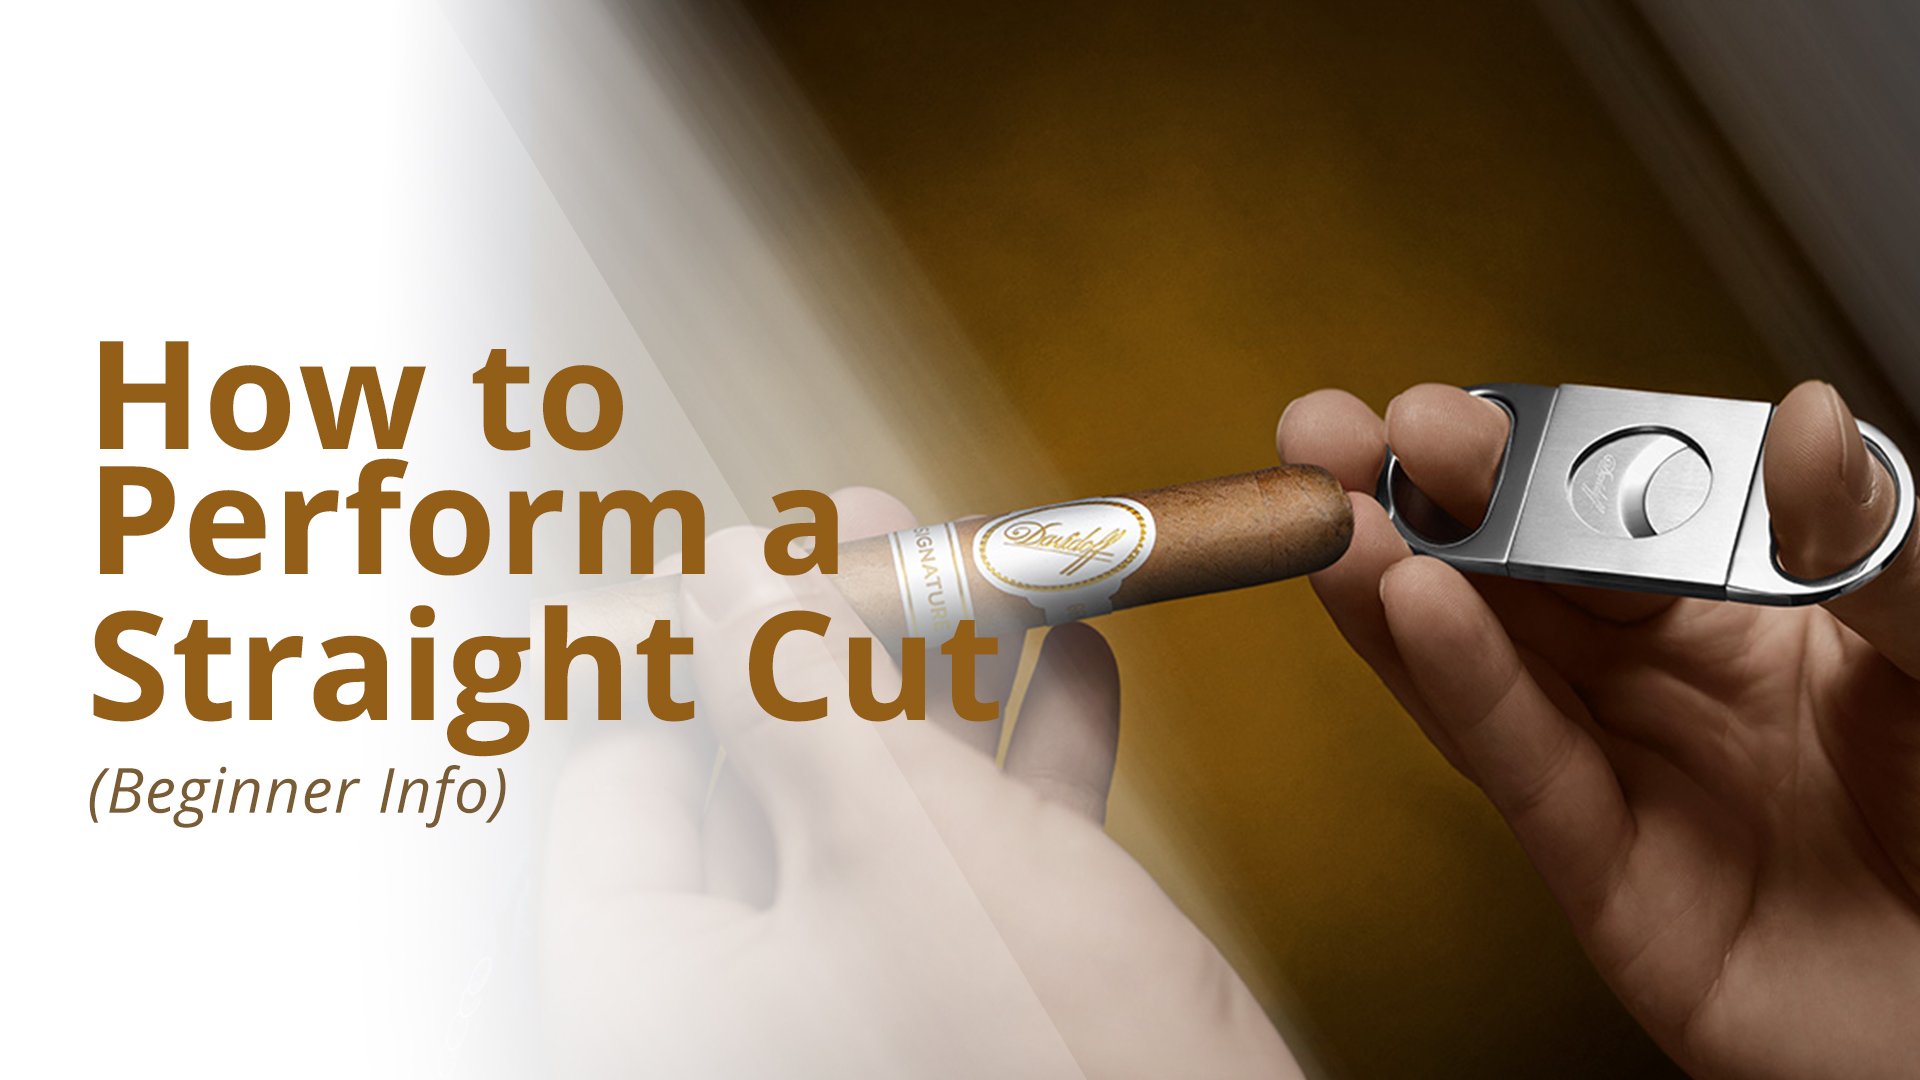 How to cut a cigar with straight or guillotine cutter